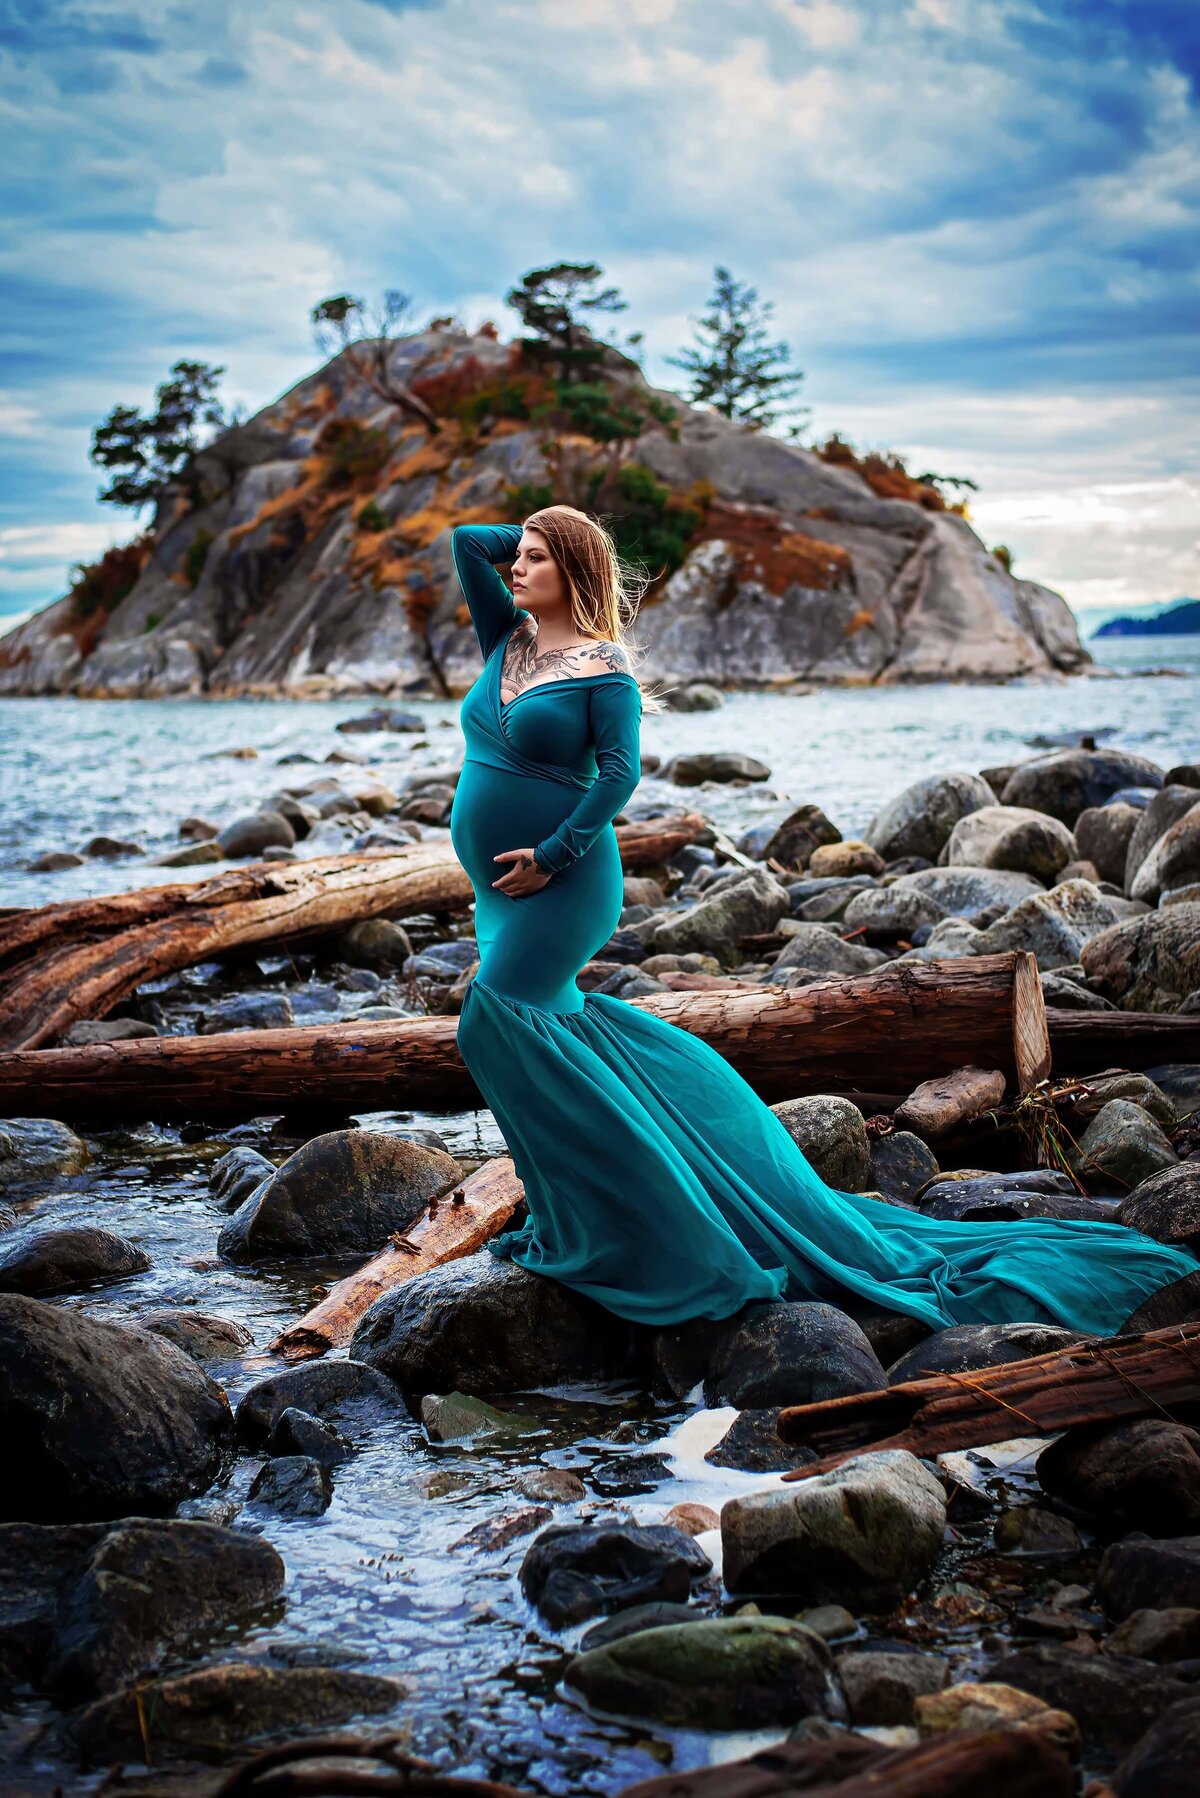 Pregnant mother in teal chiffon dress on a rocky beach.